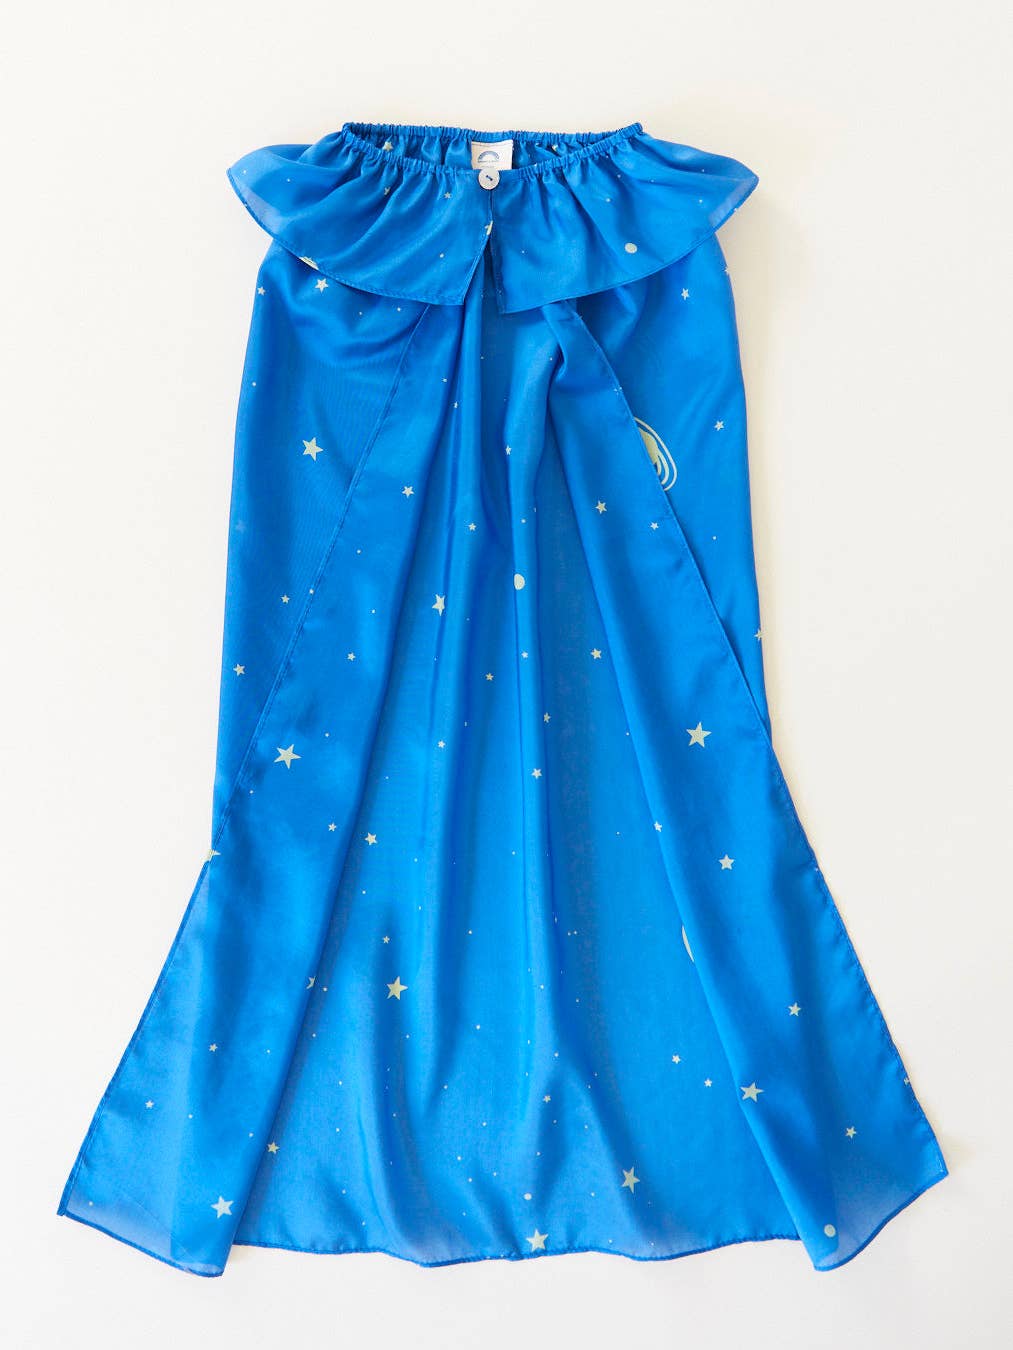 Star Cape - 100% Silk Capes For Dress Up & Pretend Play